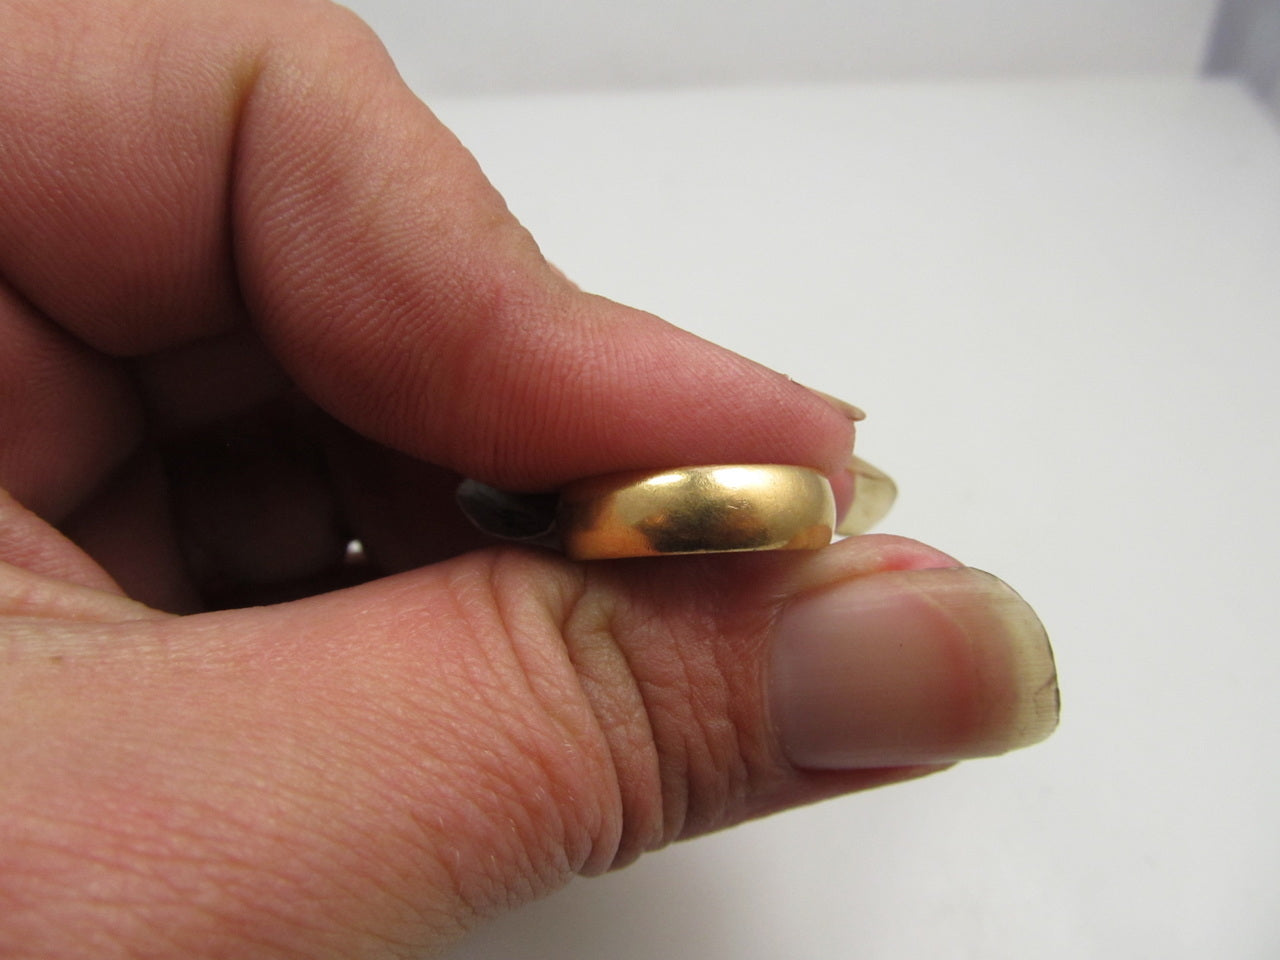 14k Yellow Gold Band Dated Nov 2nd 1837.